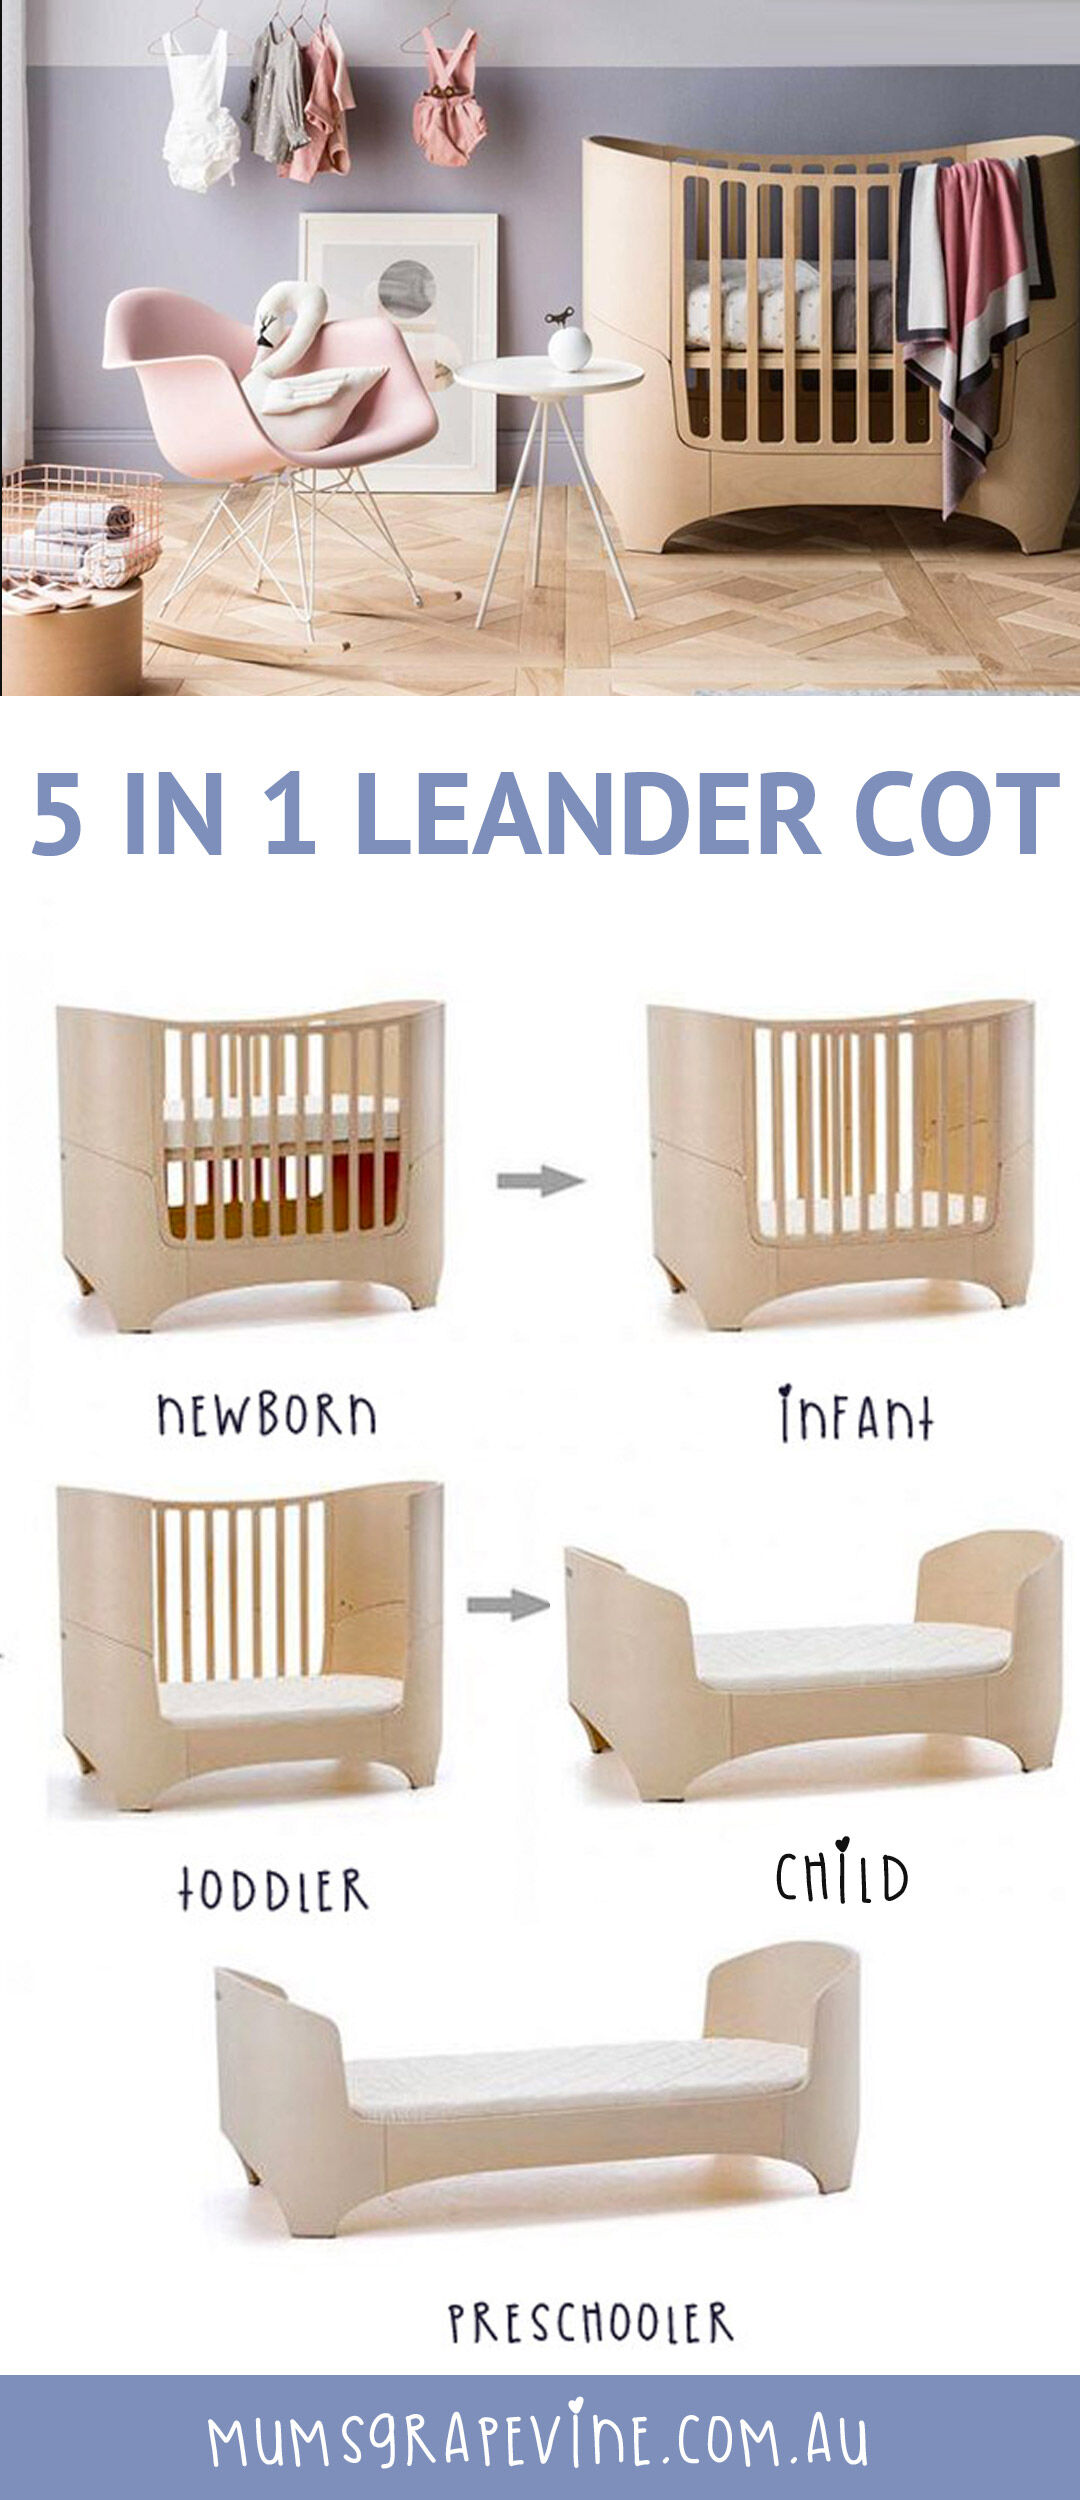 5 in 1 convertible cot by Leander